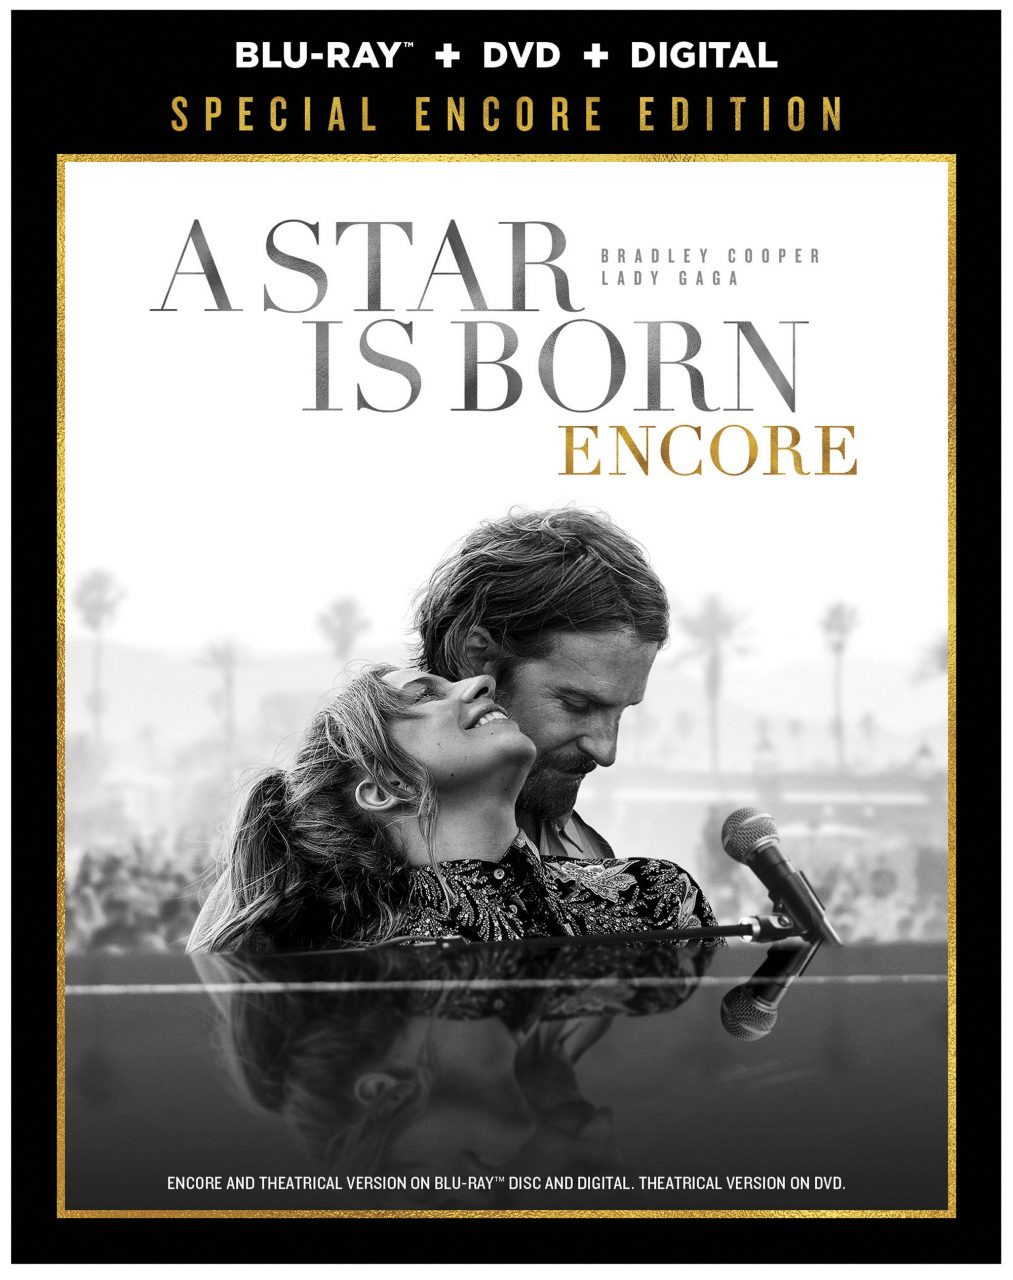 A Star Is Born Encore Blu-Ray Combo Pack cover (Warner Bros. Home Entertainment)